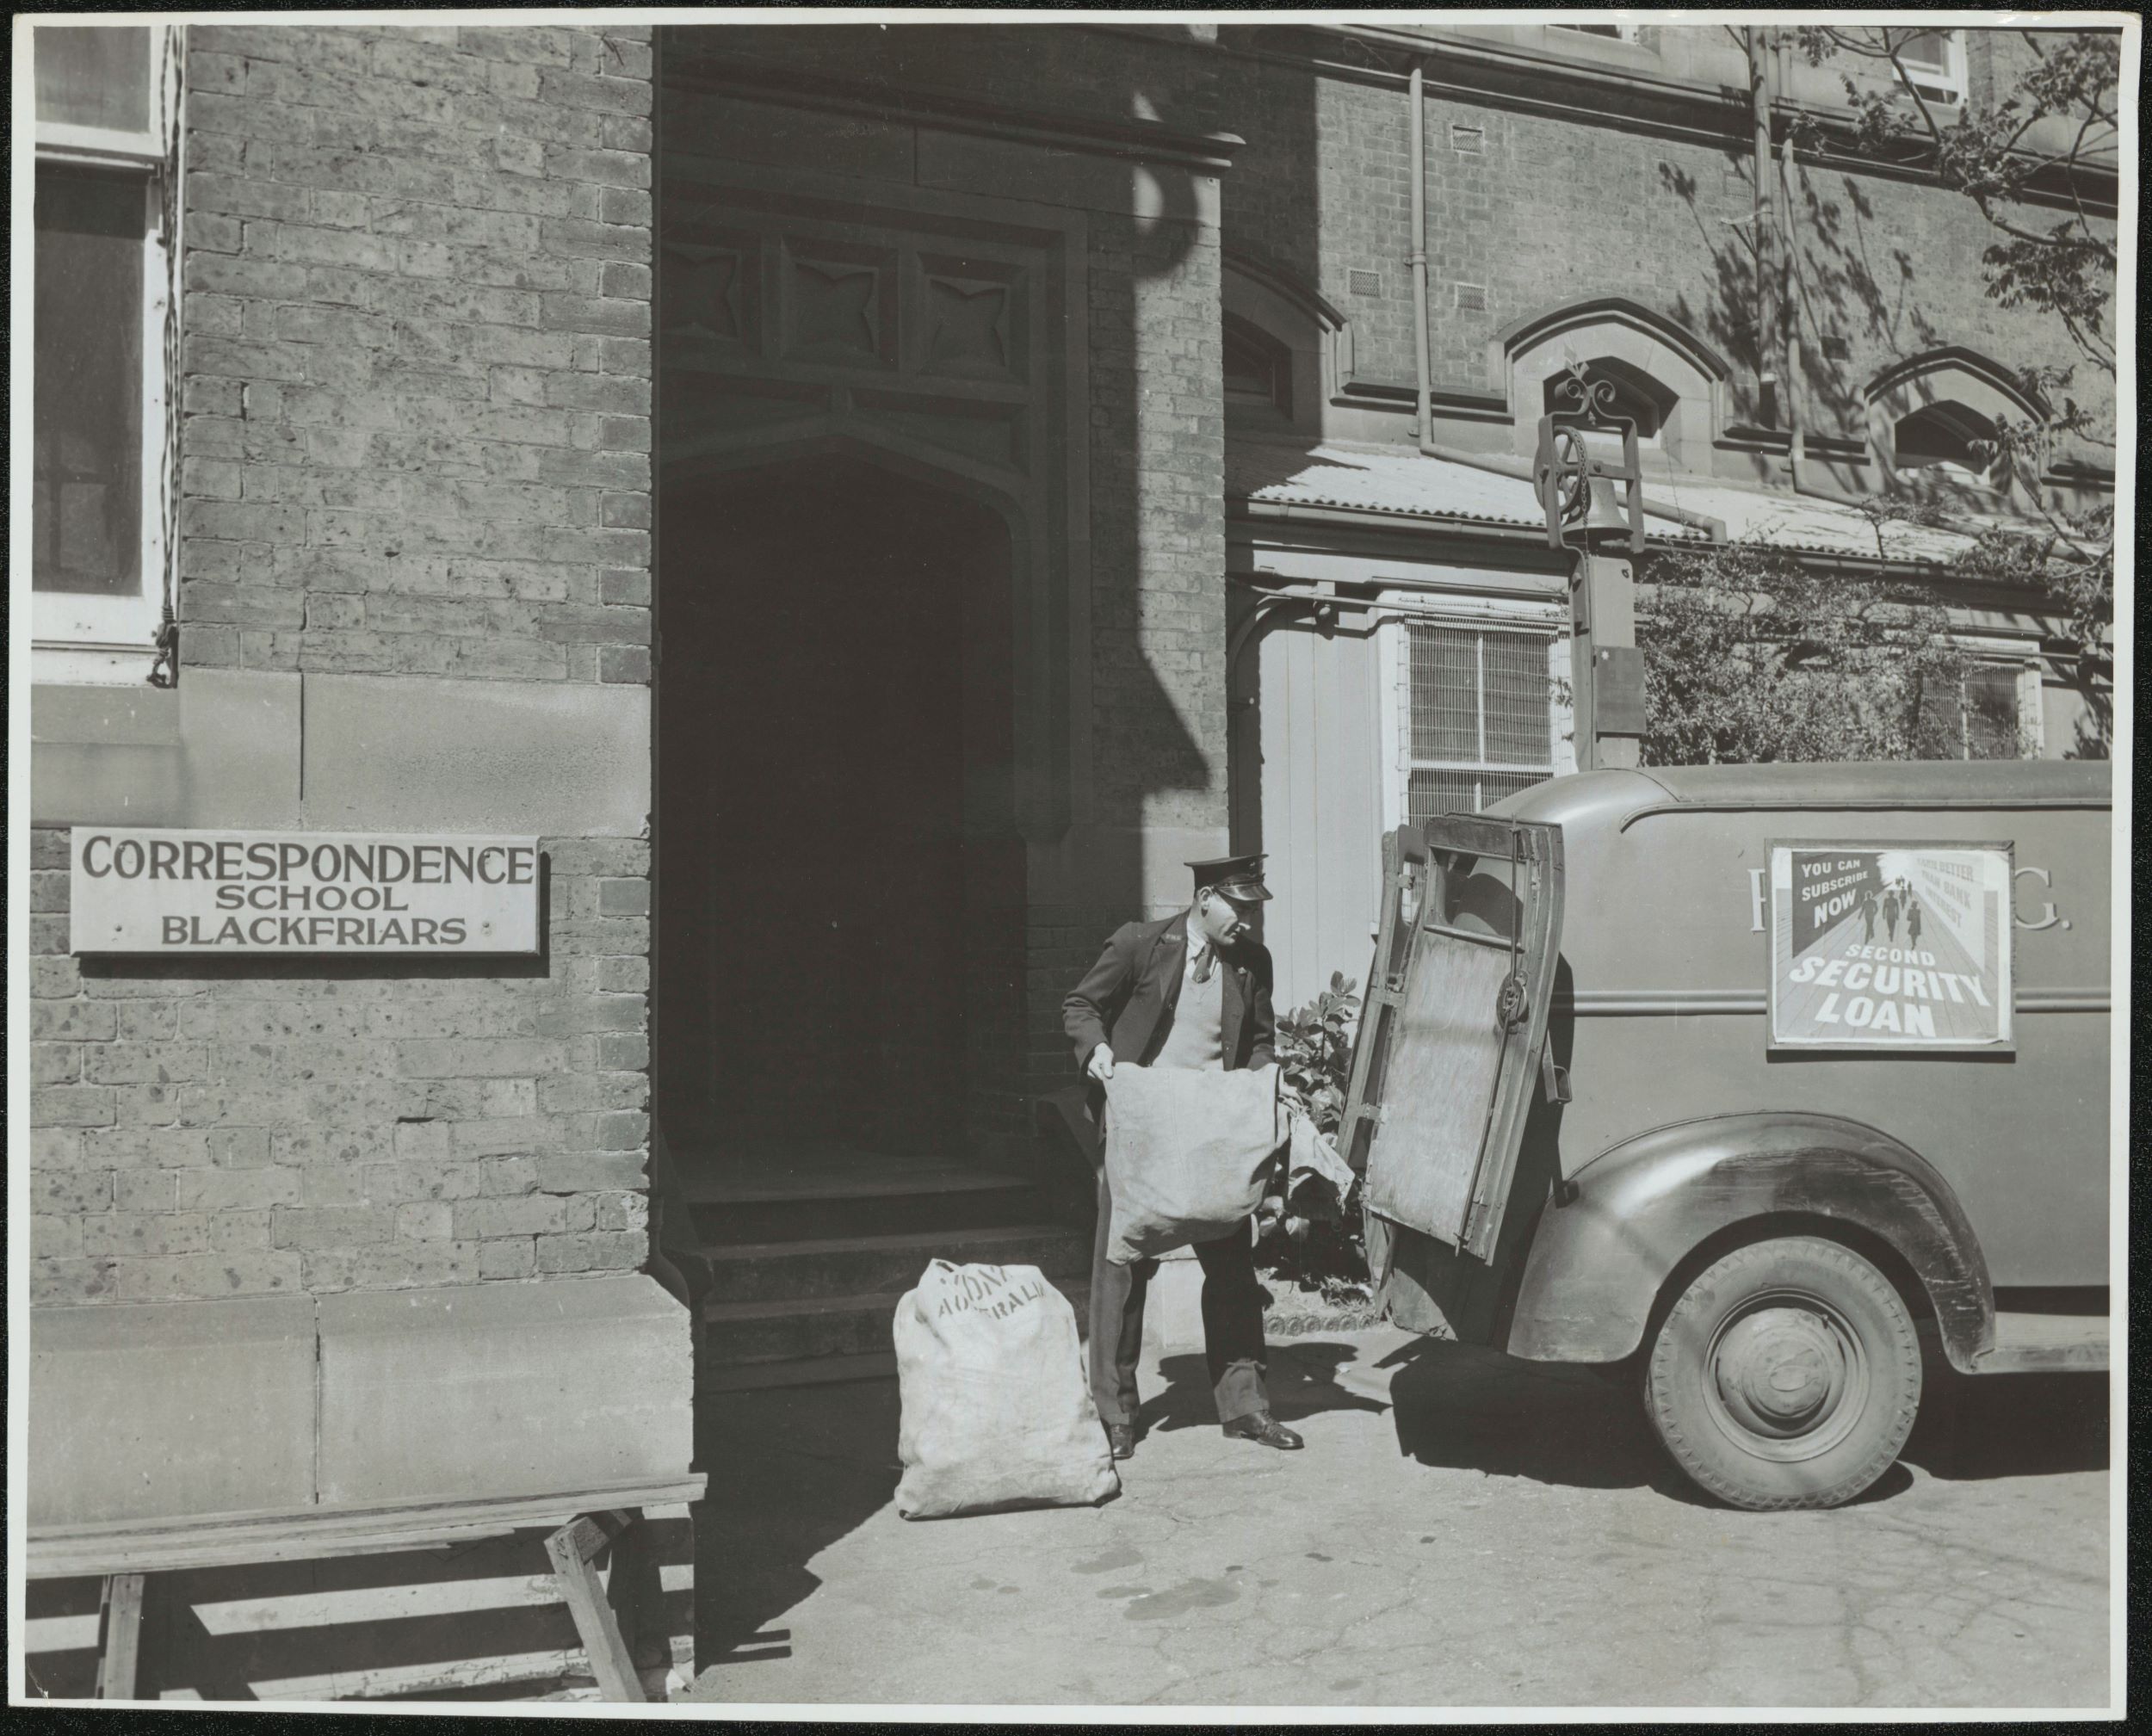 Mailman packing the delivery van with sacks of mail.